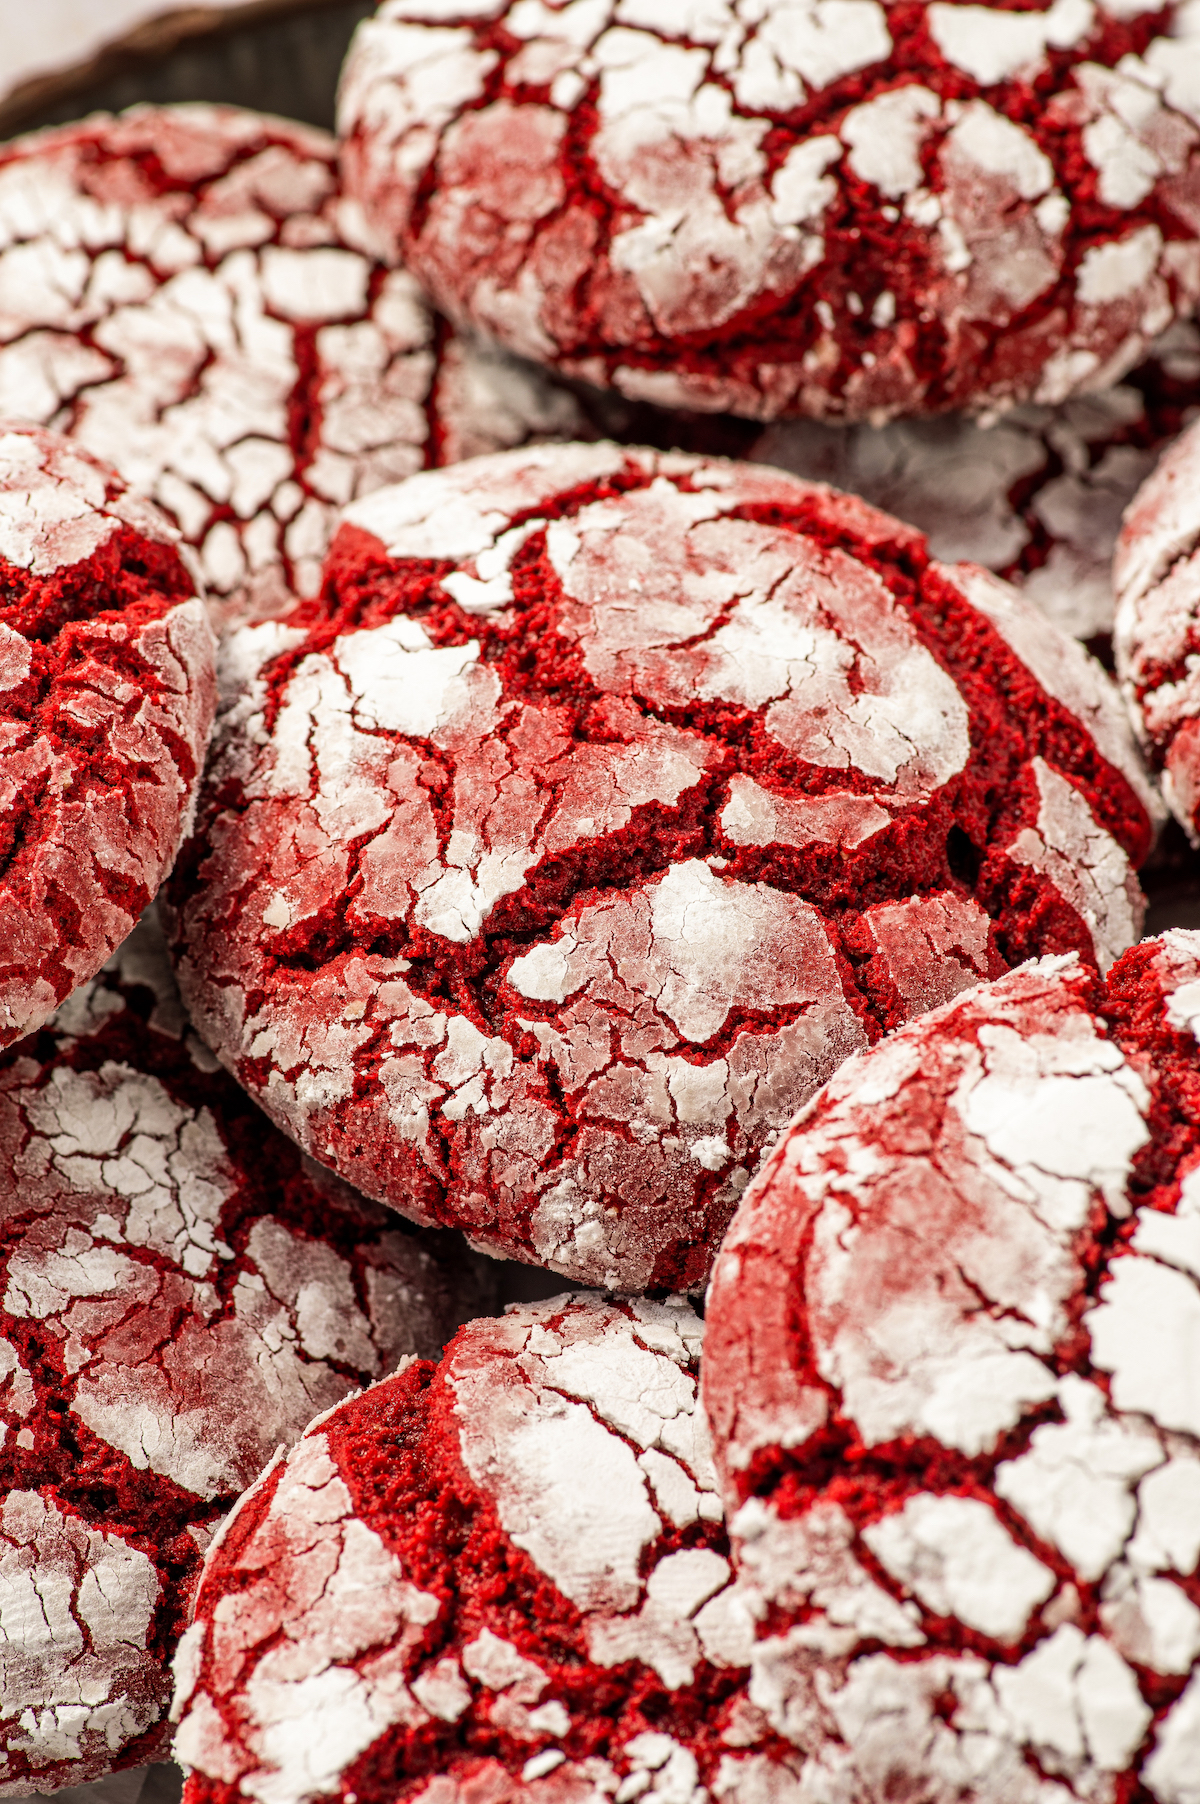 Red velvet cake mix cookies close-up, showing texture.